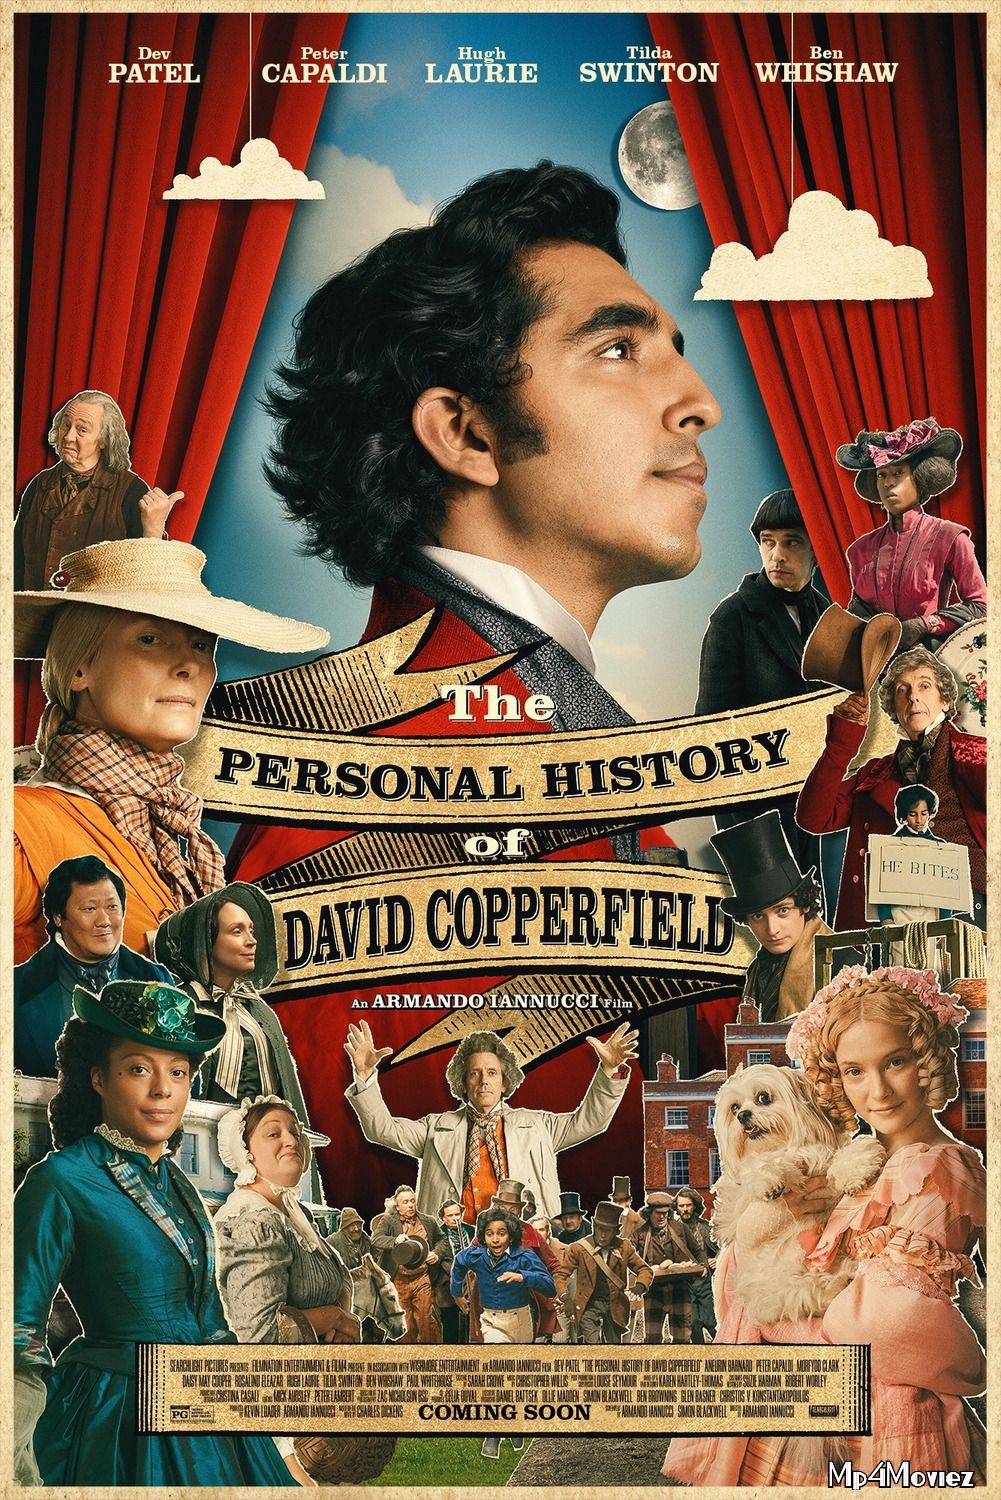 The Personal History of David Copperfield 2019 Unofficial Hindi Dubbed Movie download full movie